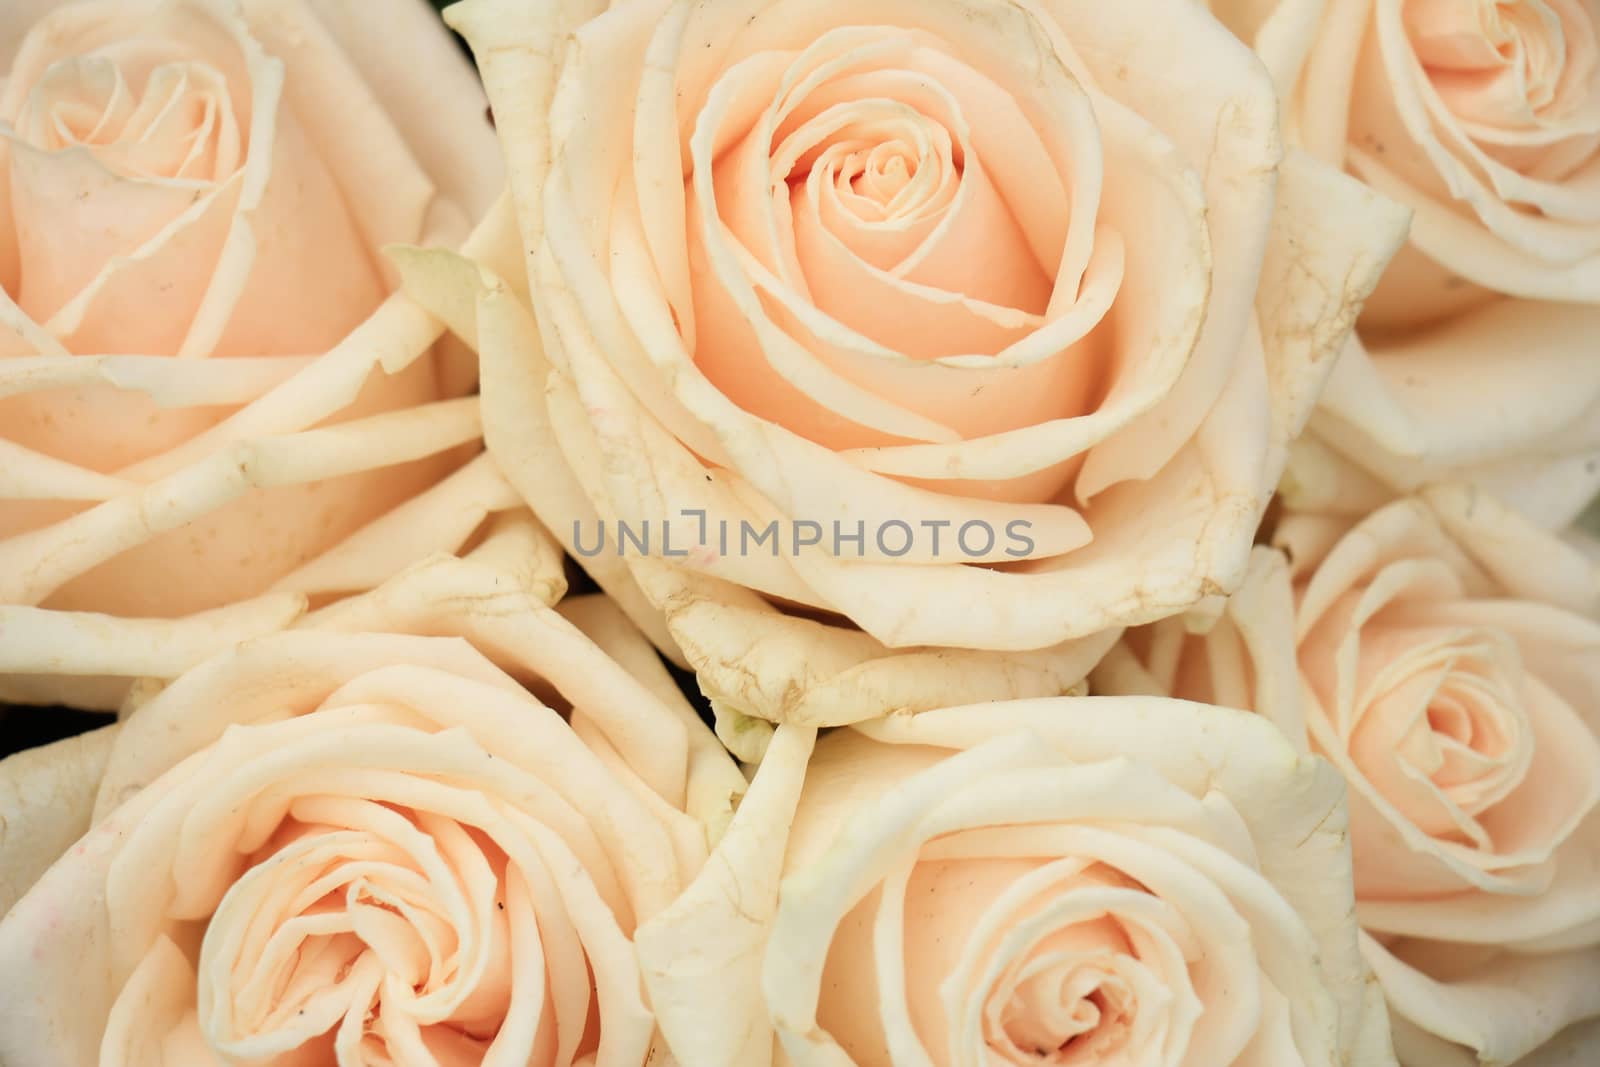 Pale pink roses in a floral arrangement at a wedding